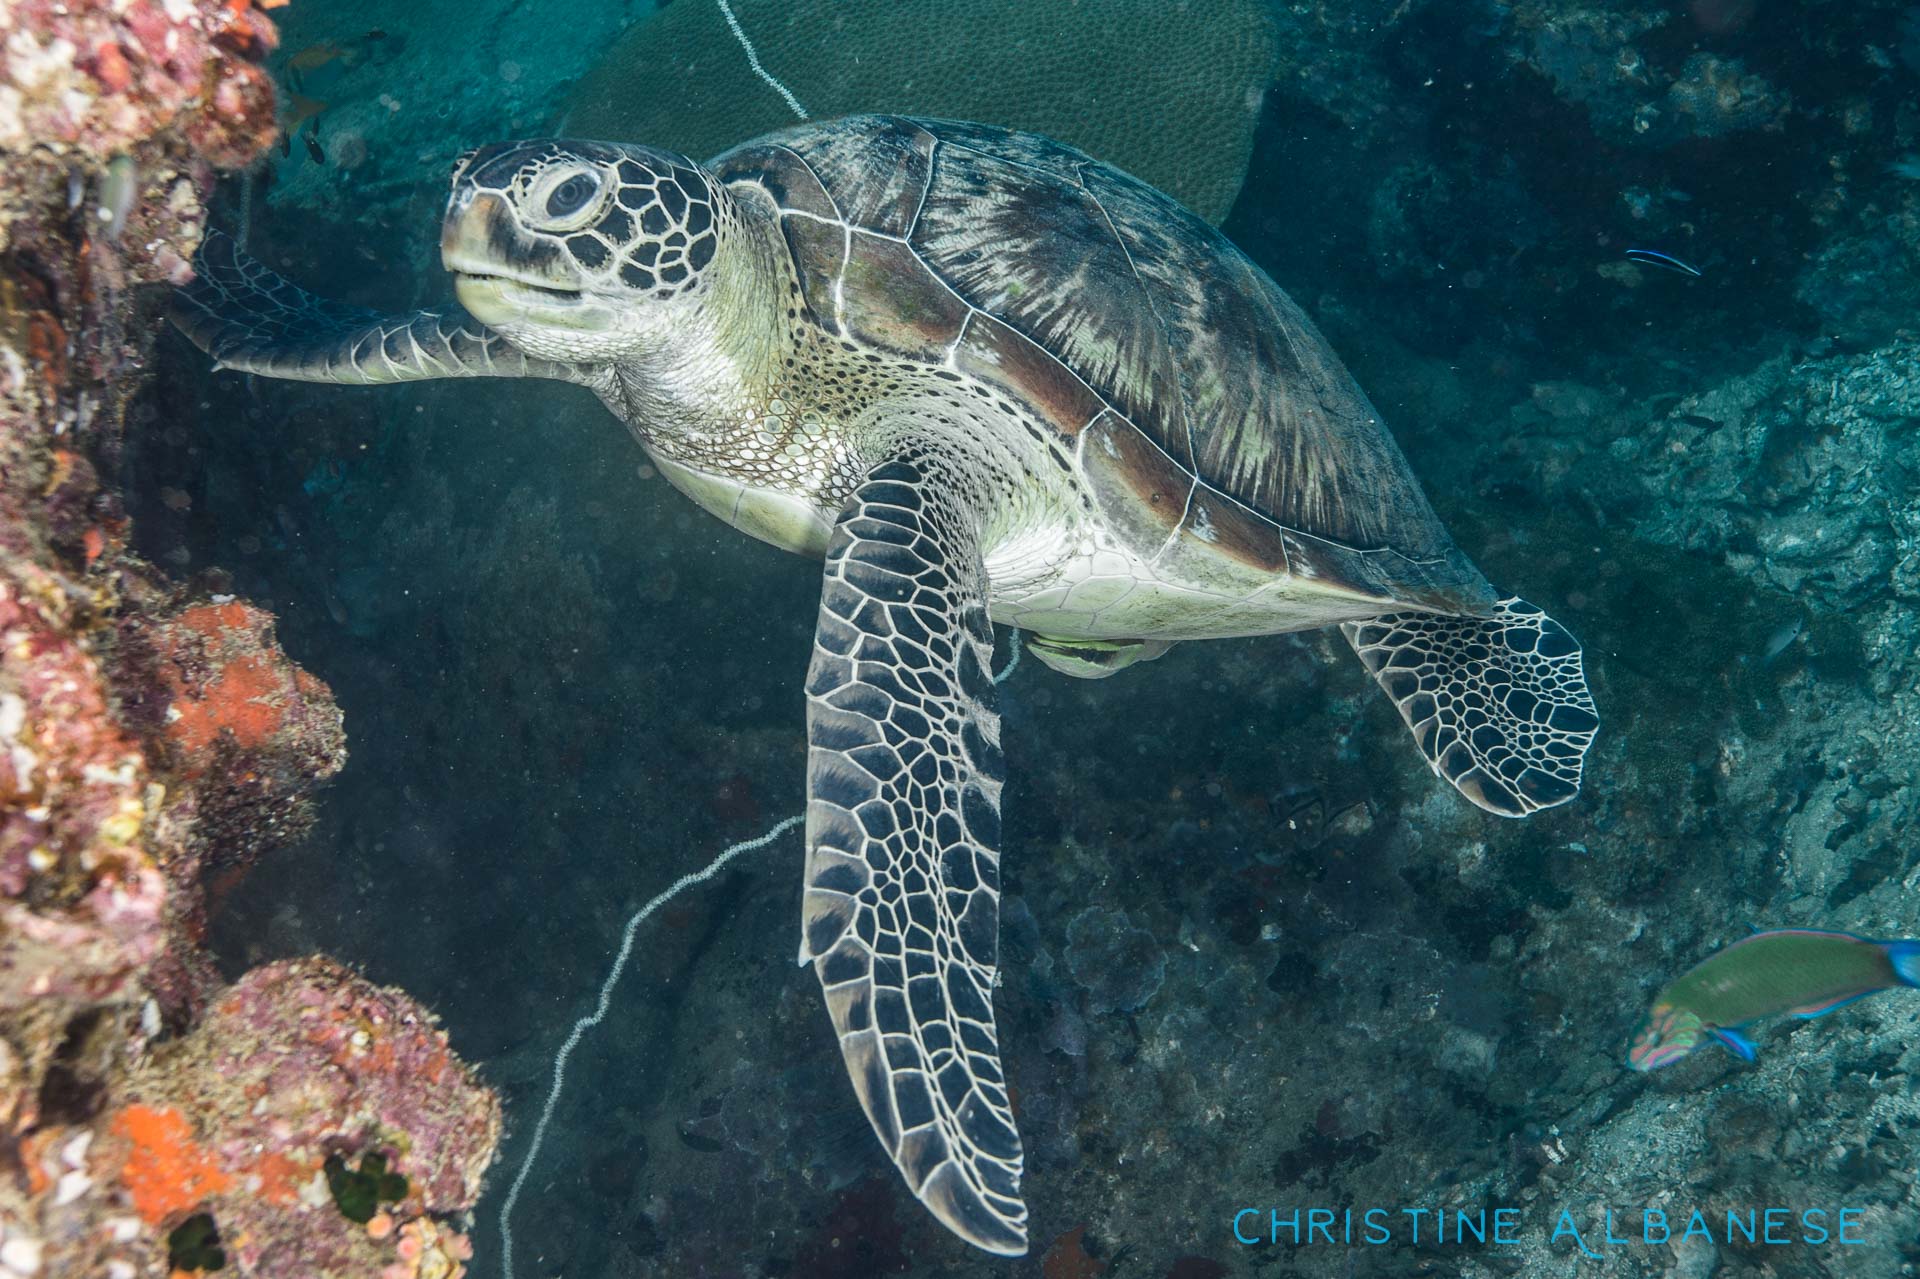 Turtles are so chill! You can get so close to them and they couldn't care less 😋

This chunky green turtle wss spotted at Shark Island having his breakfast.